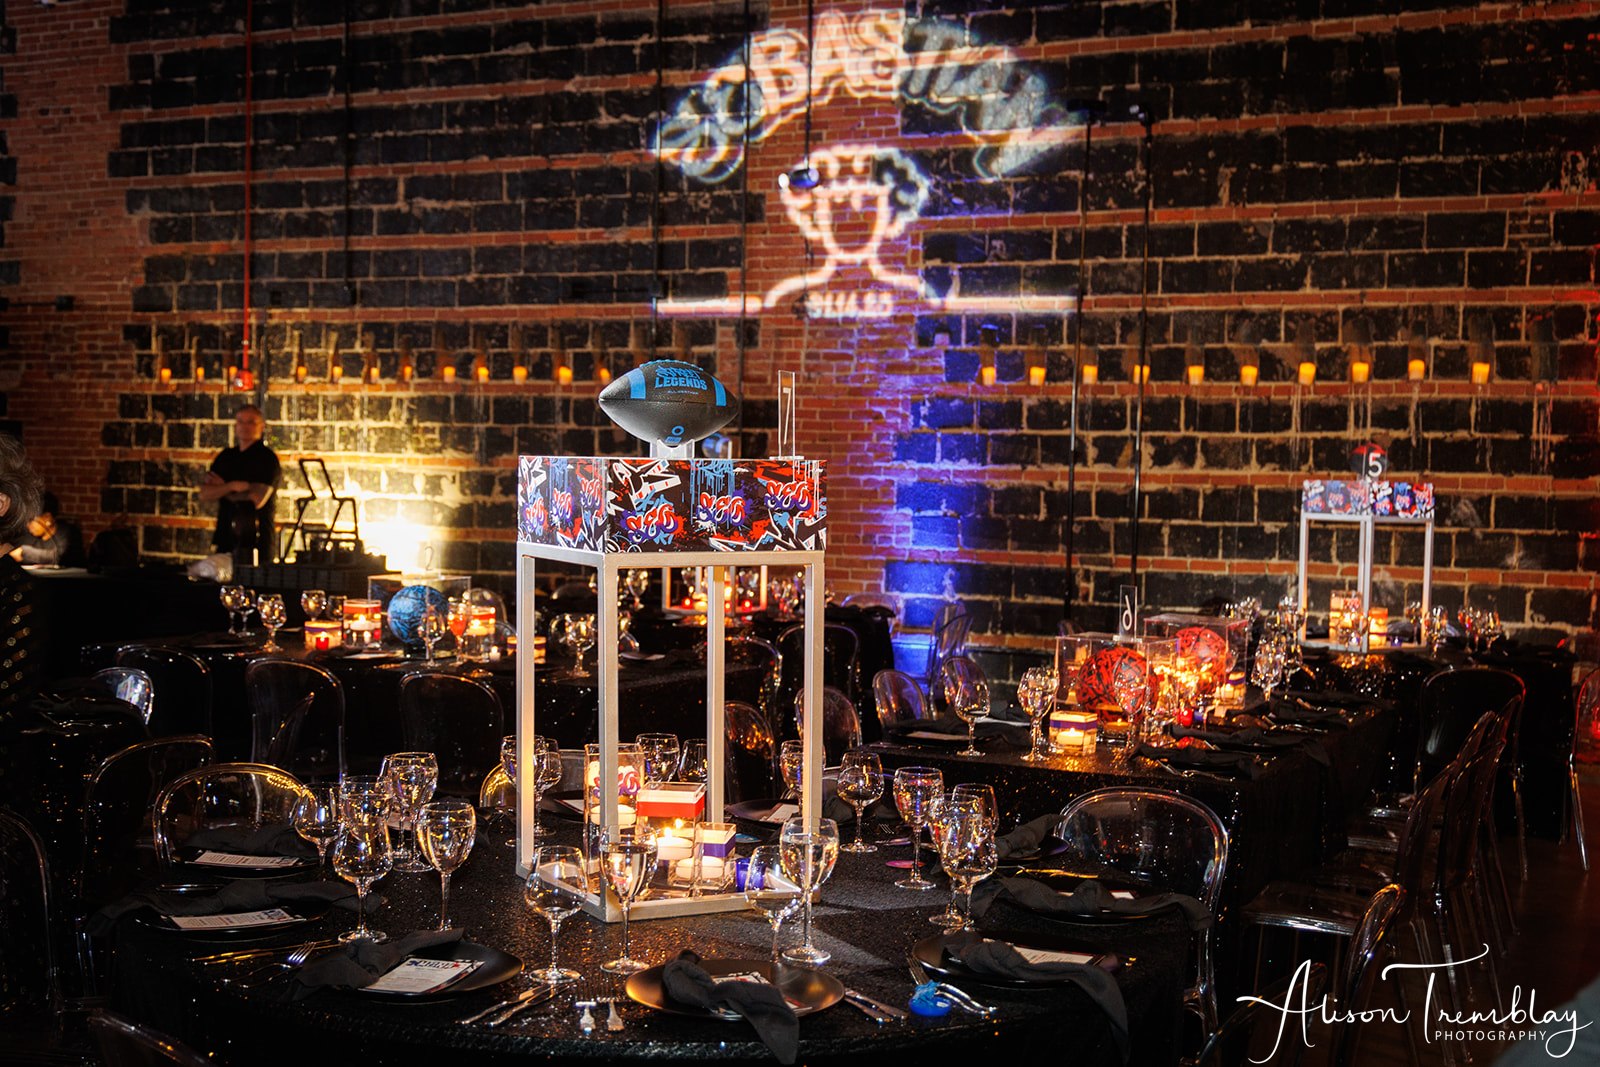 Bringing a touch of elegance with these sporty and graffiti decorations plus the custom gobo on the wall at Sebastian's Graffiti and Sports Bar Mitzvah Party at Hook Hall in Washington, DC | Pop Color Events | Adding a Pop of Color to Bar & Bat Mitzvahs in DC, MD & VA | Photo by: Alison Tremblay